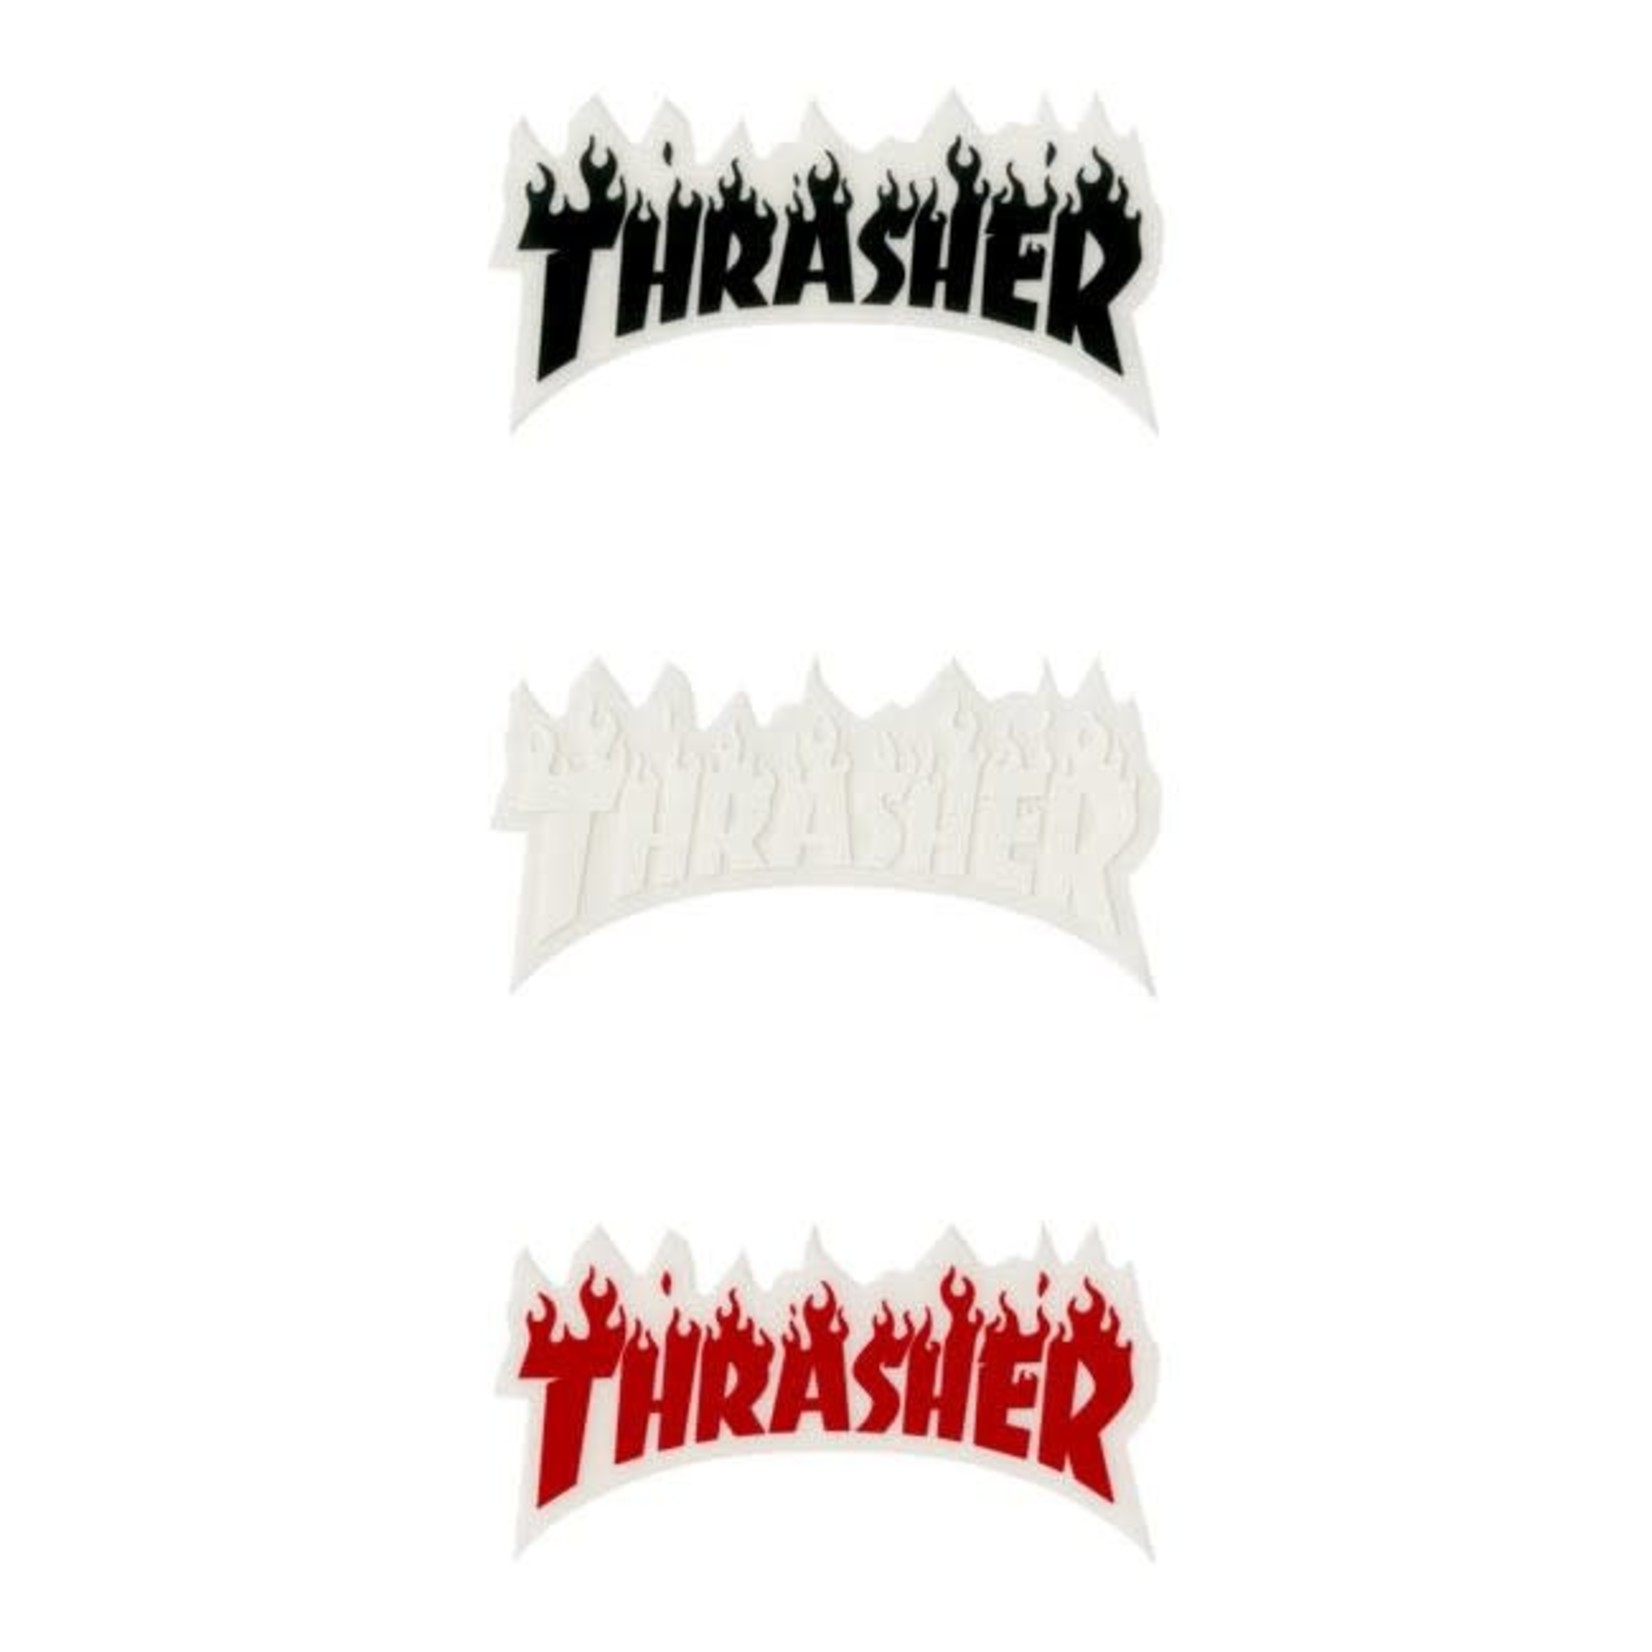 Thrasher Thrasher Flame clear Sticker (Small)